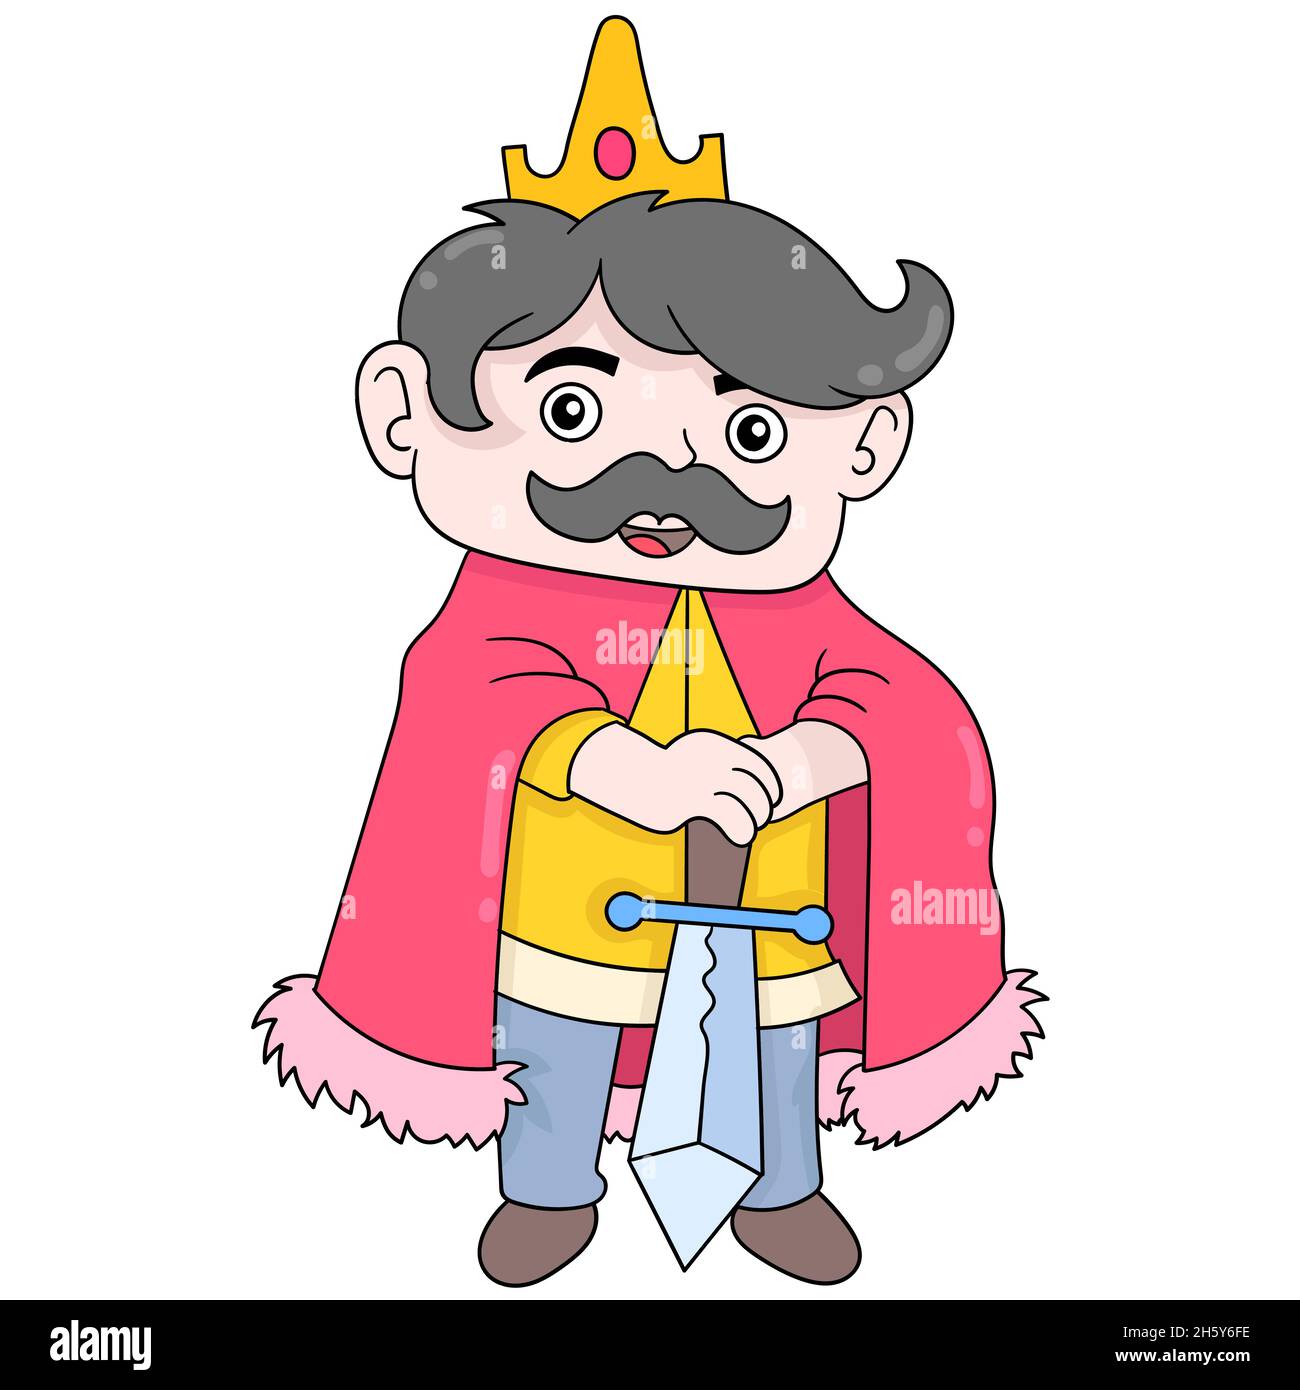 King arthur Stock Vector Images - Alamy